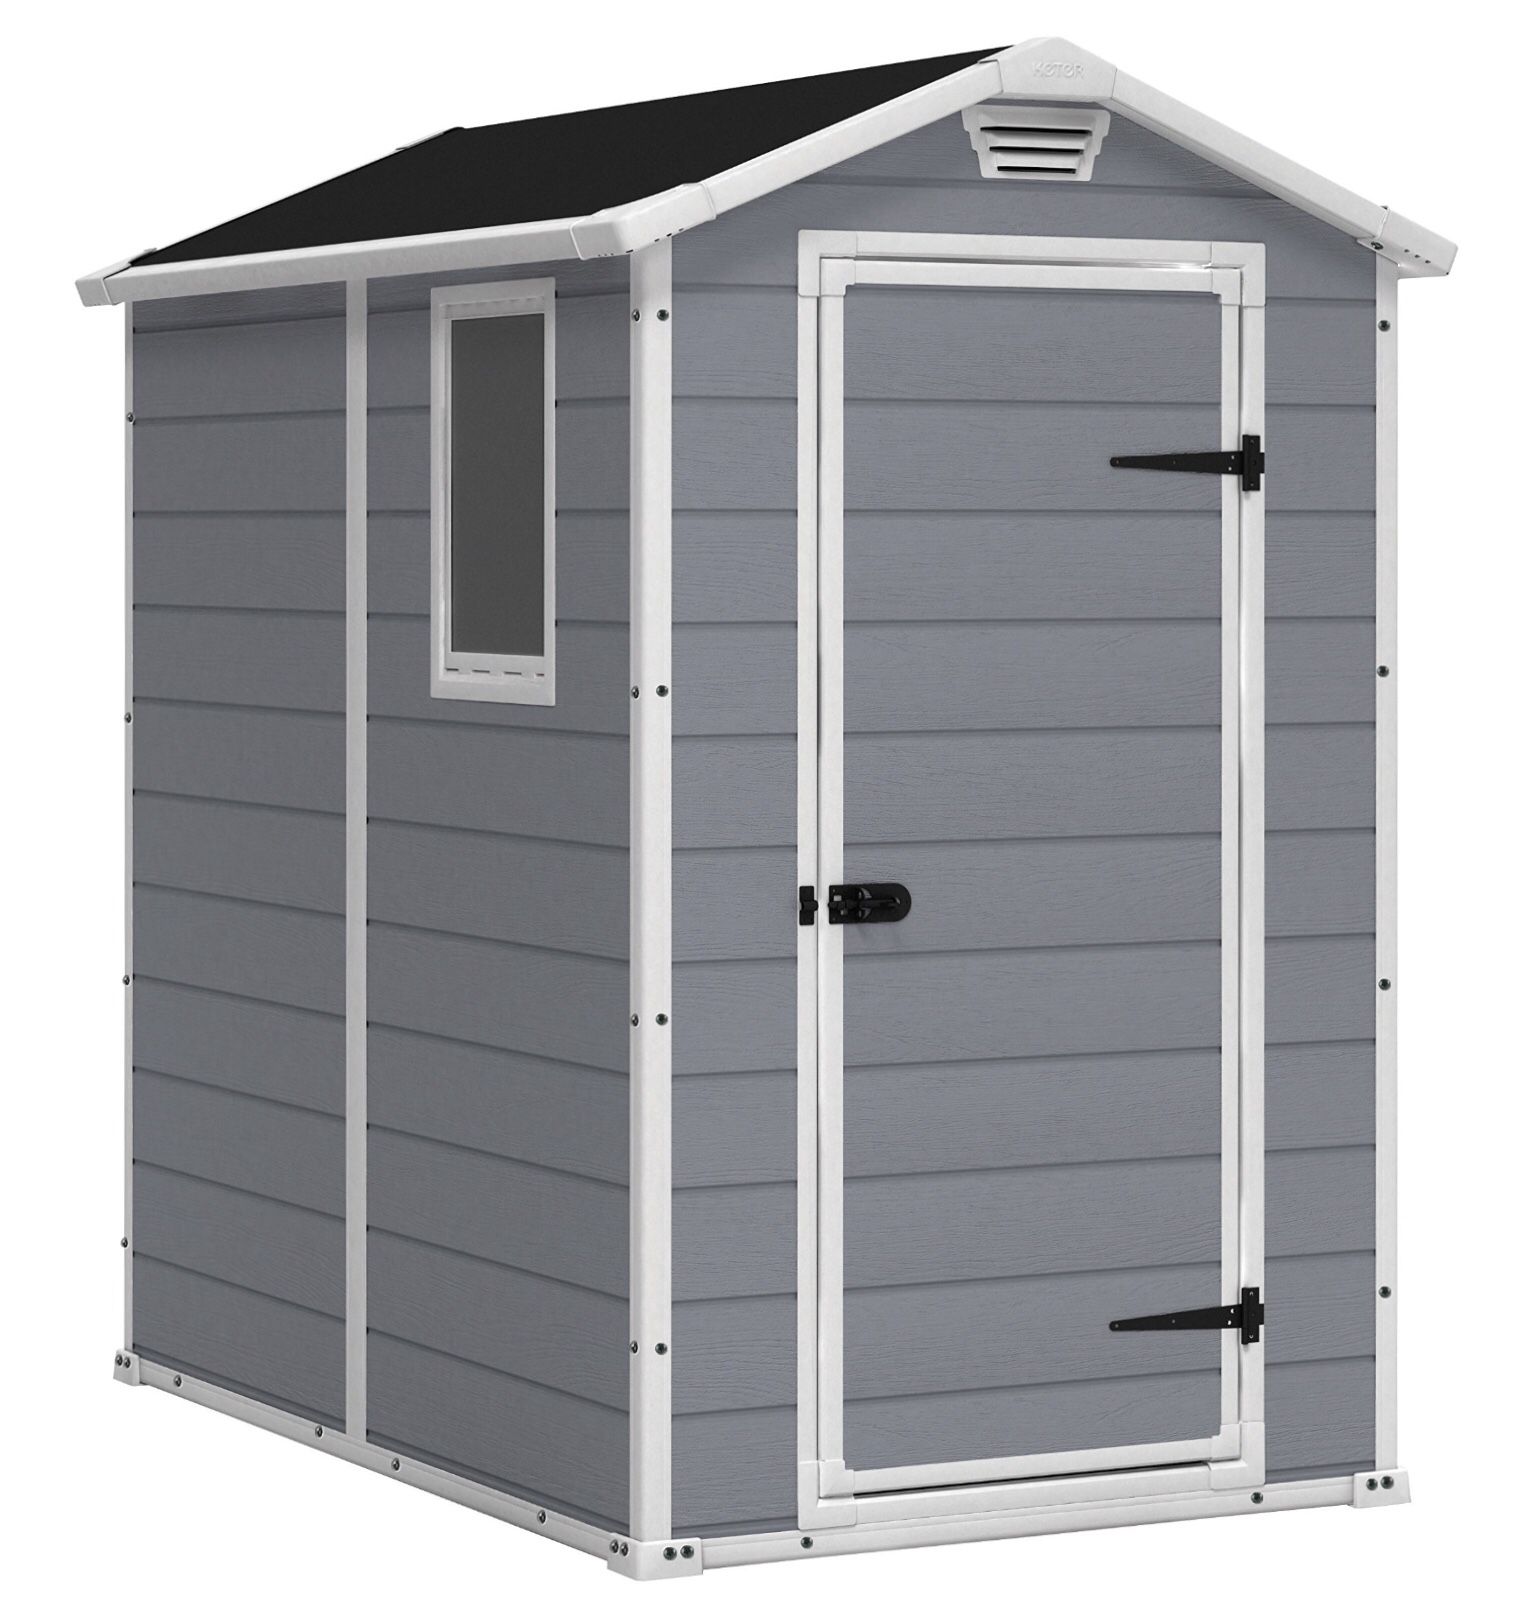 KETER 4’X 6' RESIN STORAGE SHED - Delivery Available